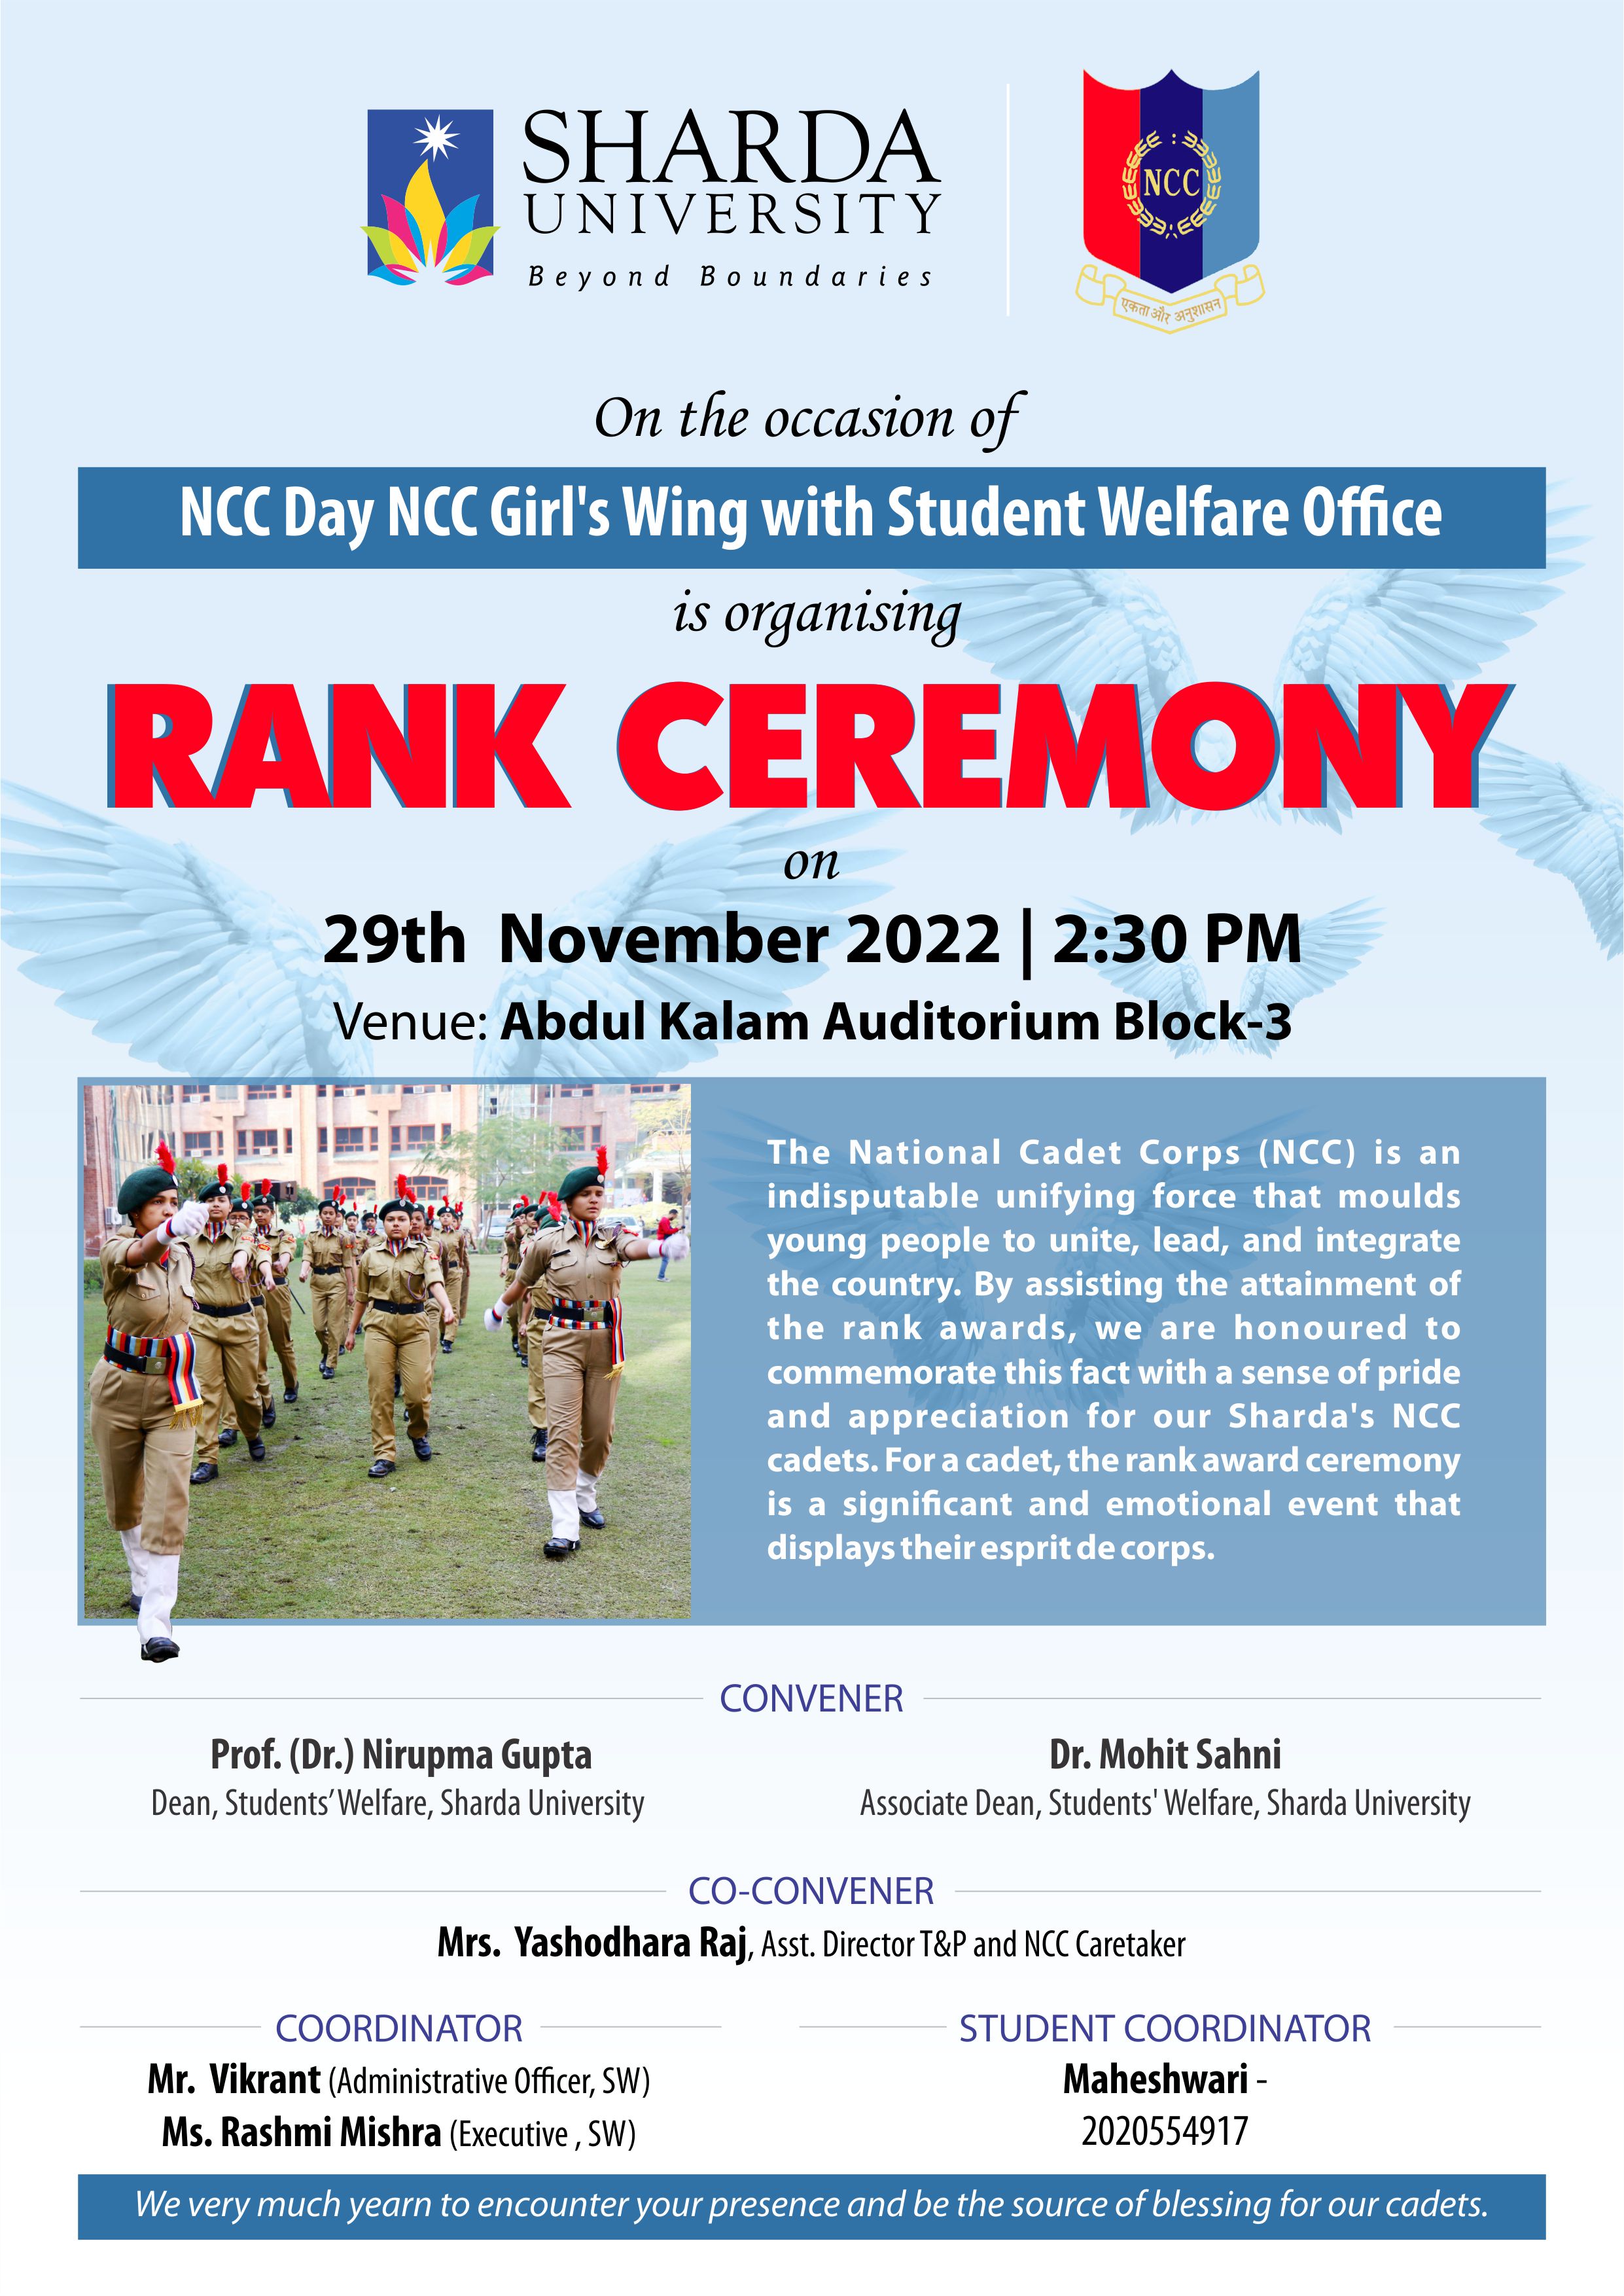 NCC Day and Rank ceremony